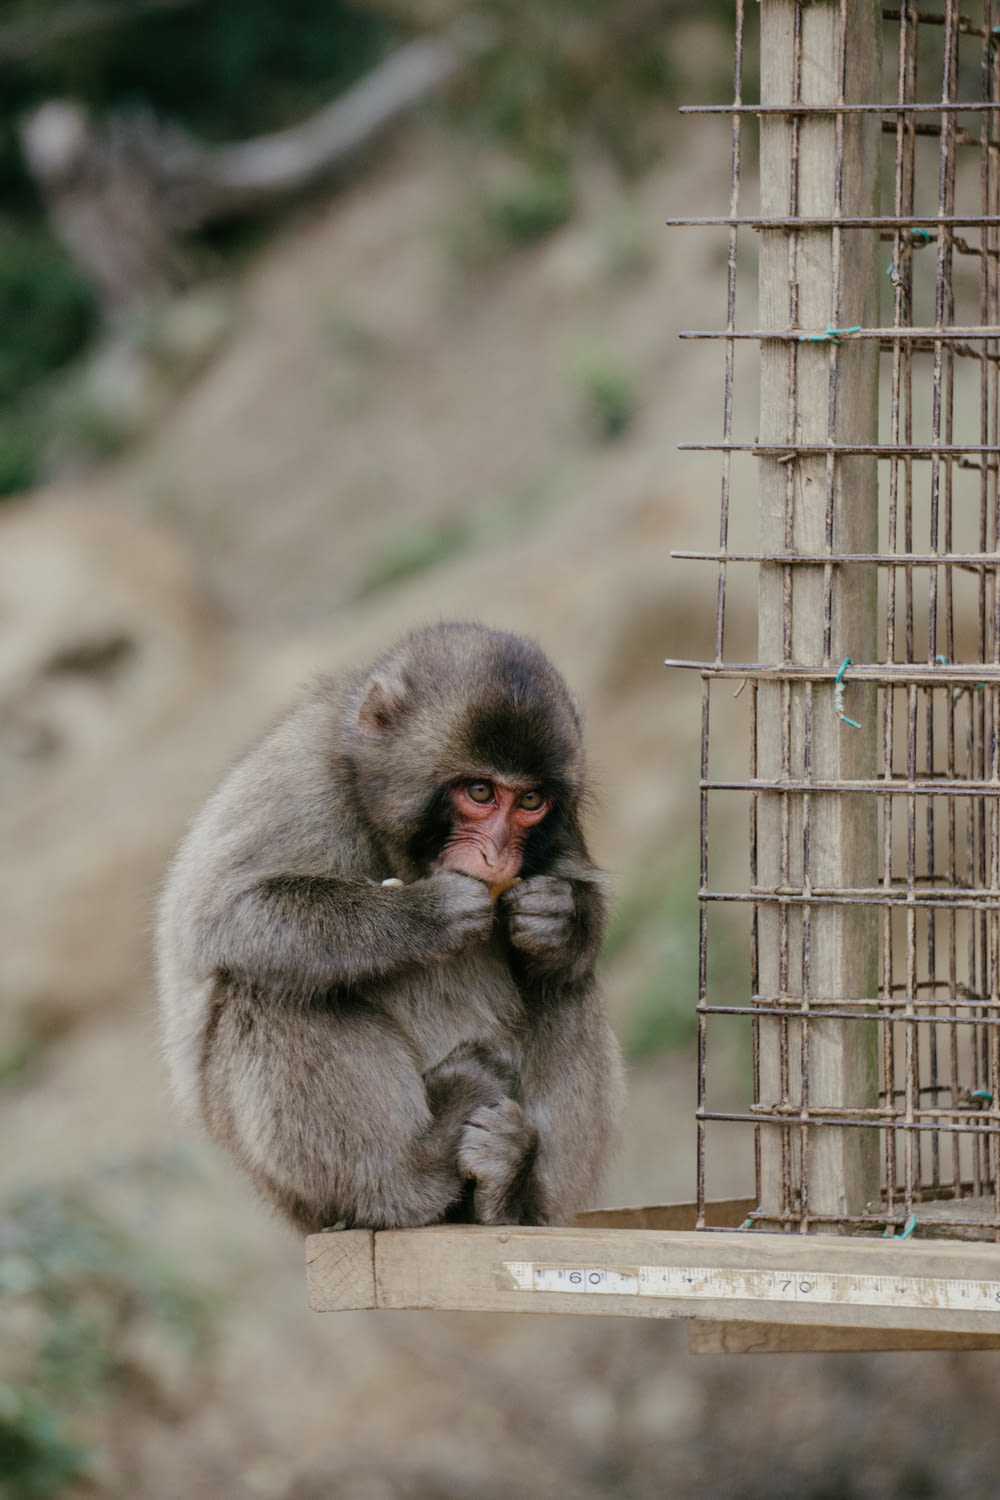 a small monkey sitting on a ledge next to a cage